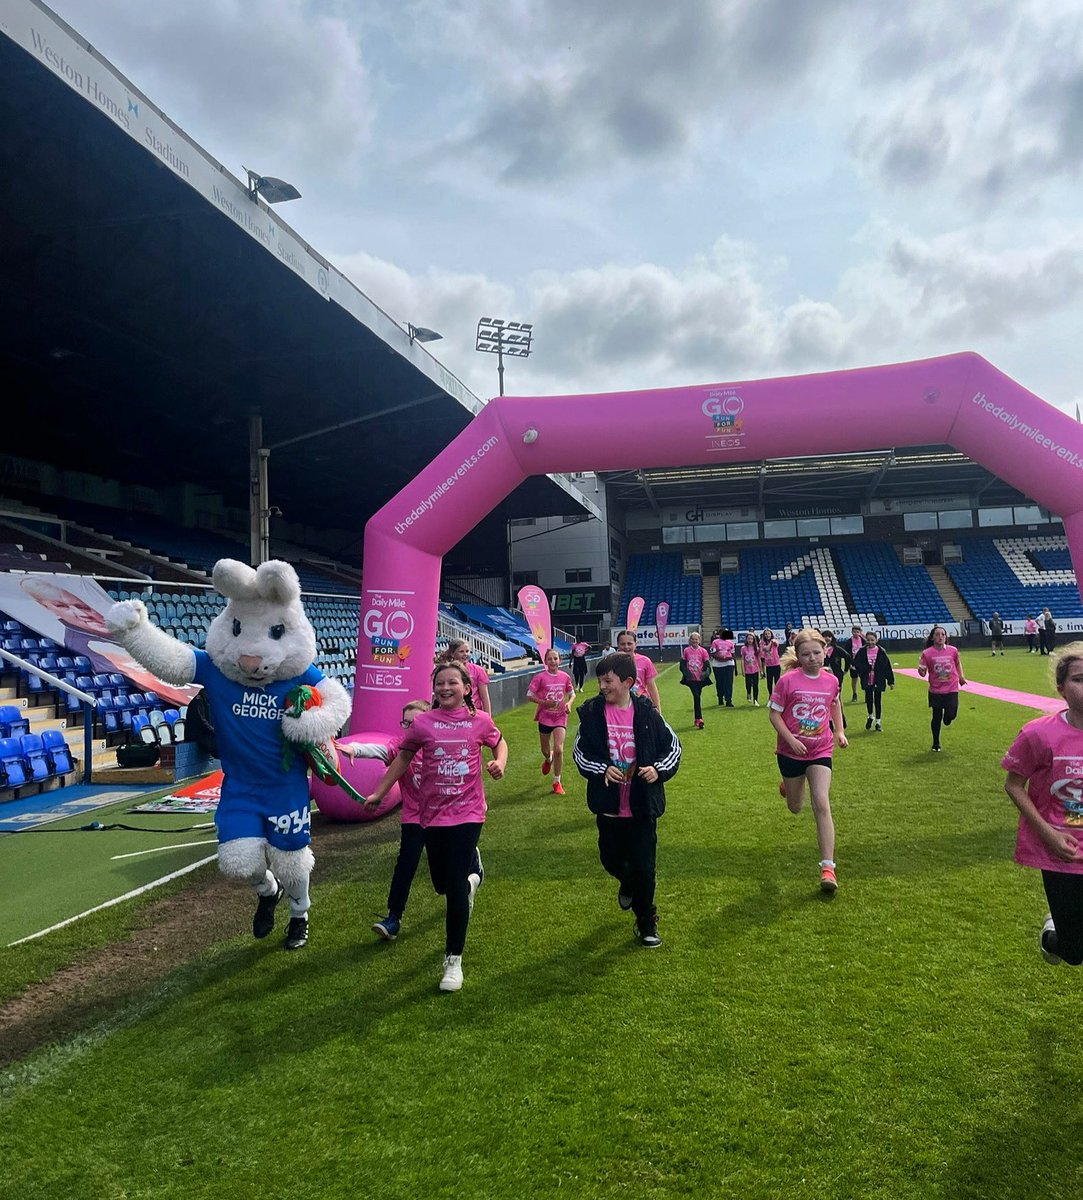 Living Sport had the amazing opportunity to partner with @_thedailymile and @theposh in providing over 90 children with the experience to get active! It’s amazing to see so many children with smiles on their faces while moving🎉 @FitnessRushMob @PeterBurrow1934